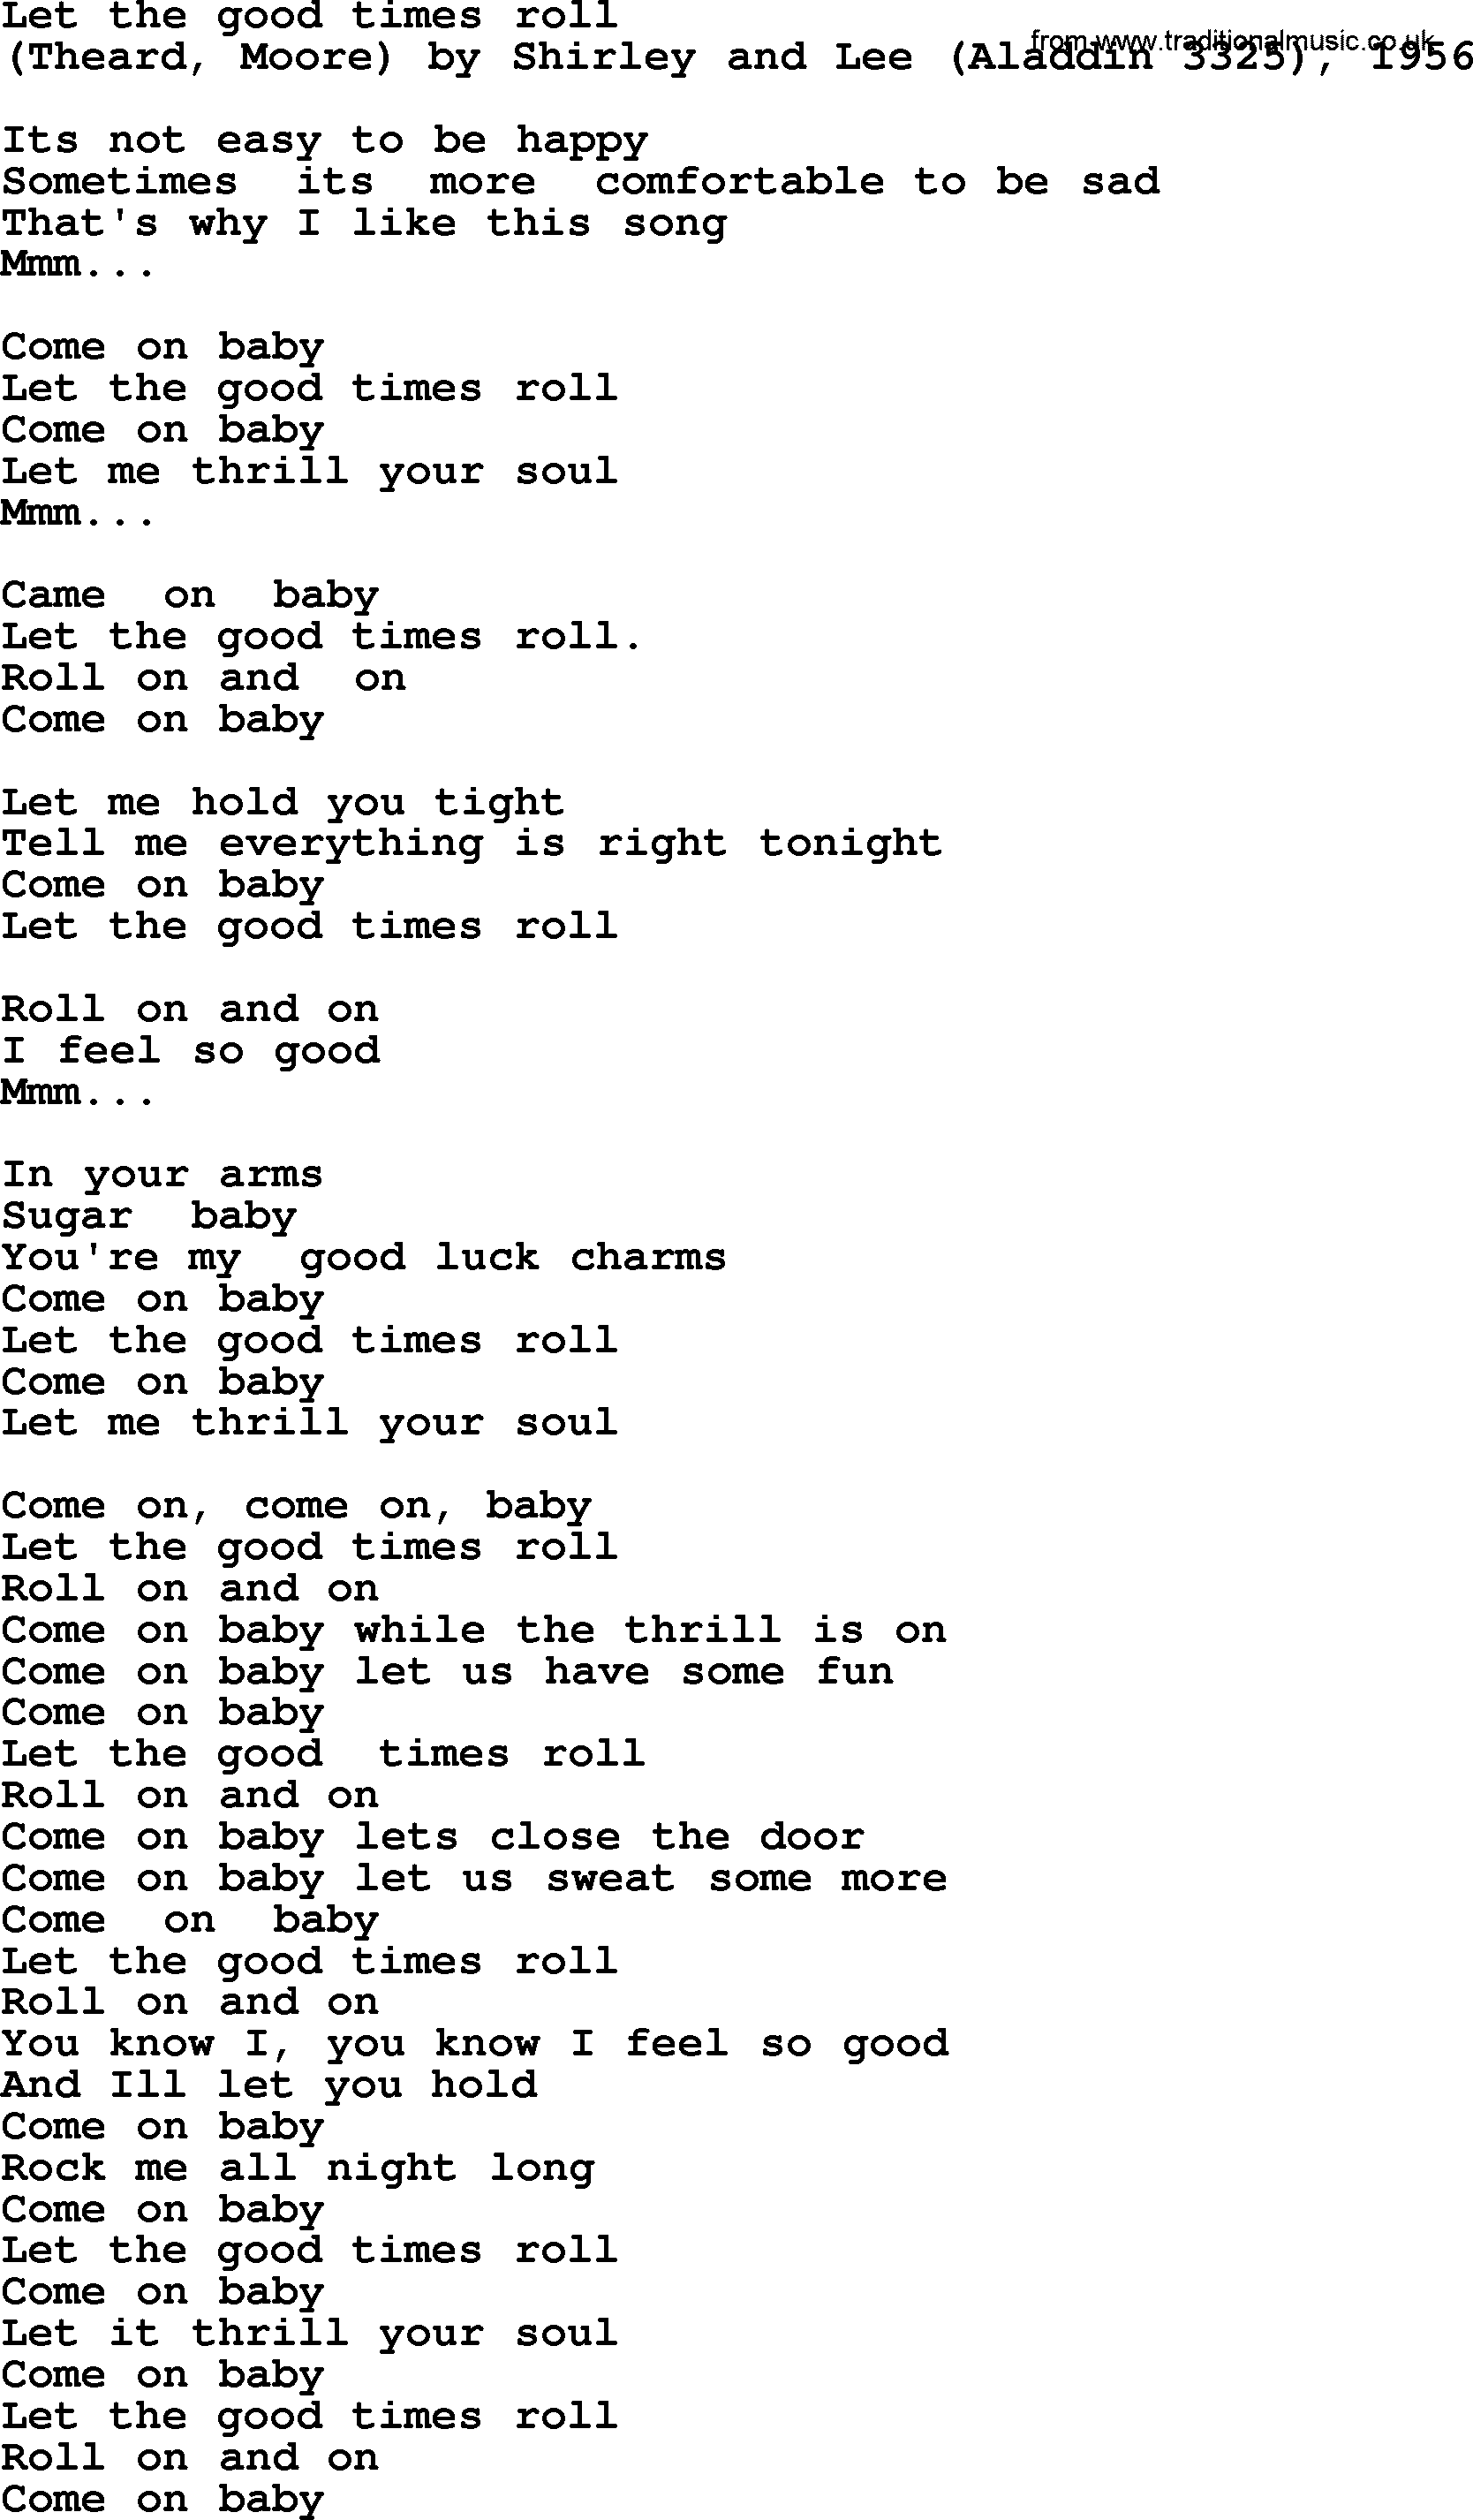 Bruce Springsteen song: Let The Good Times Roll lyrics